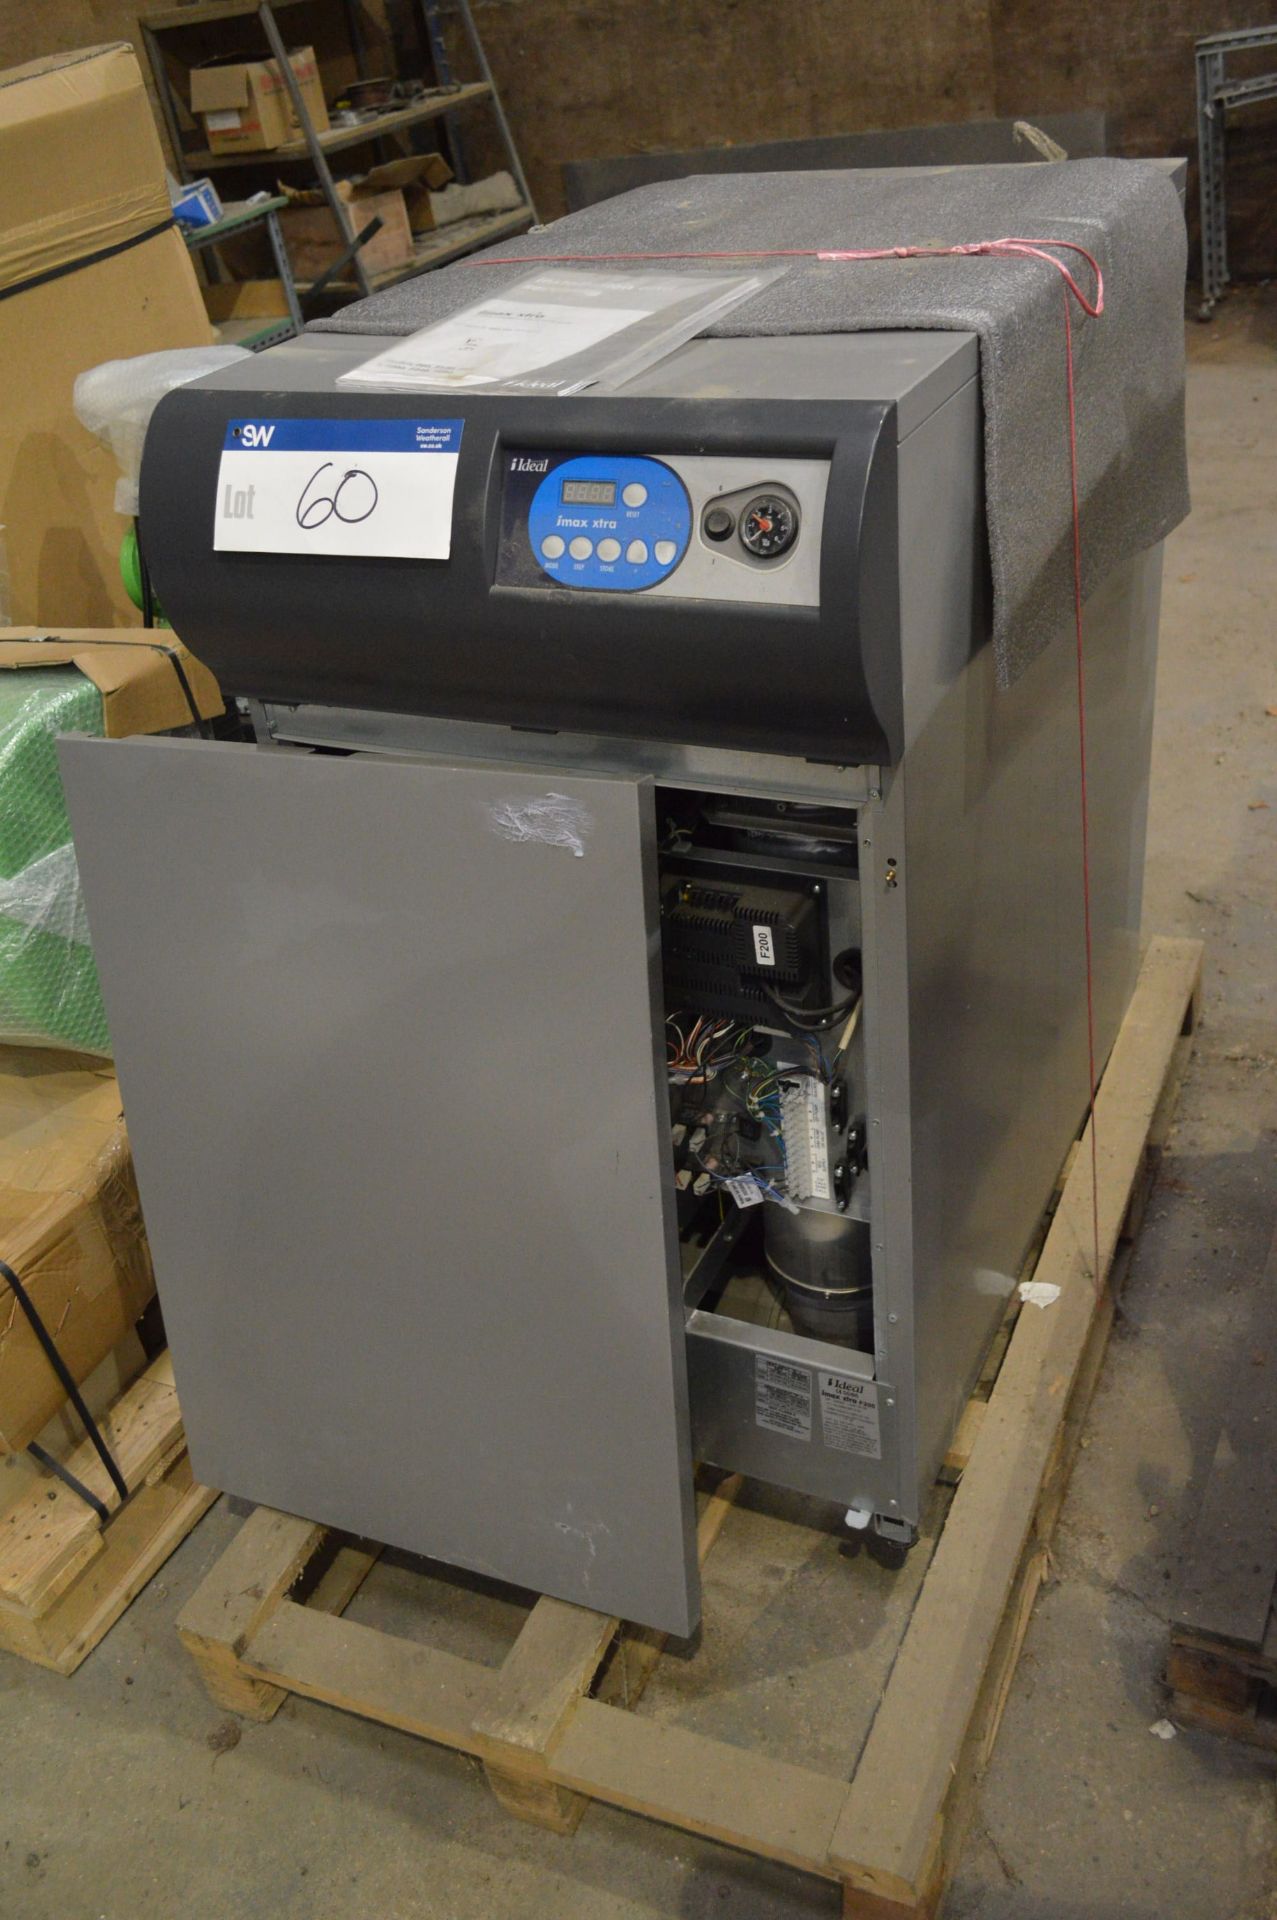 Ideal IMAX XTRA F200 FLOOR STANDING CONDENSING GAS BOILER, (UNDERSTOOD TO BE UNUSED)